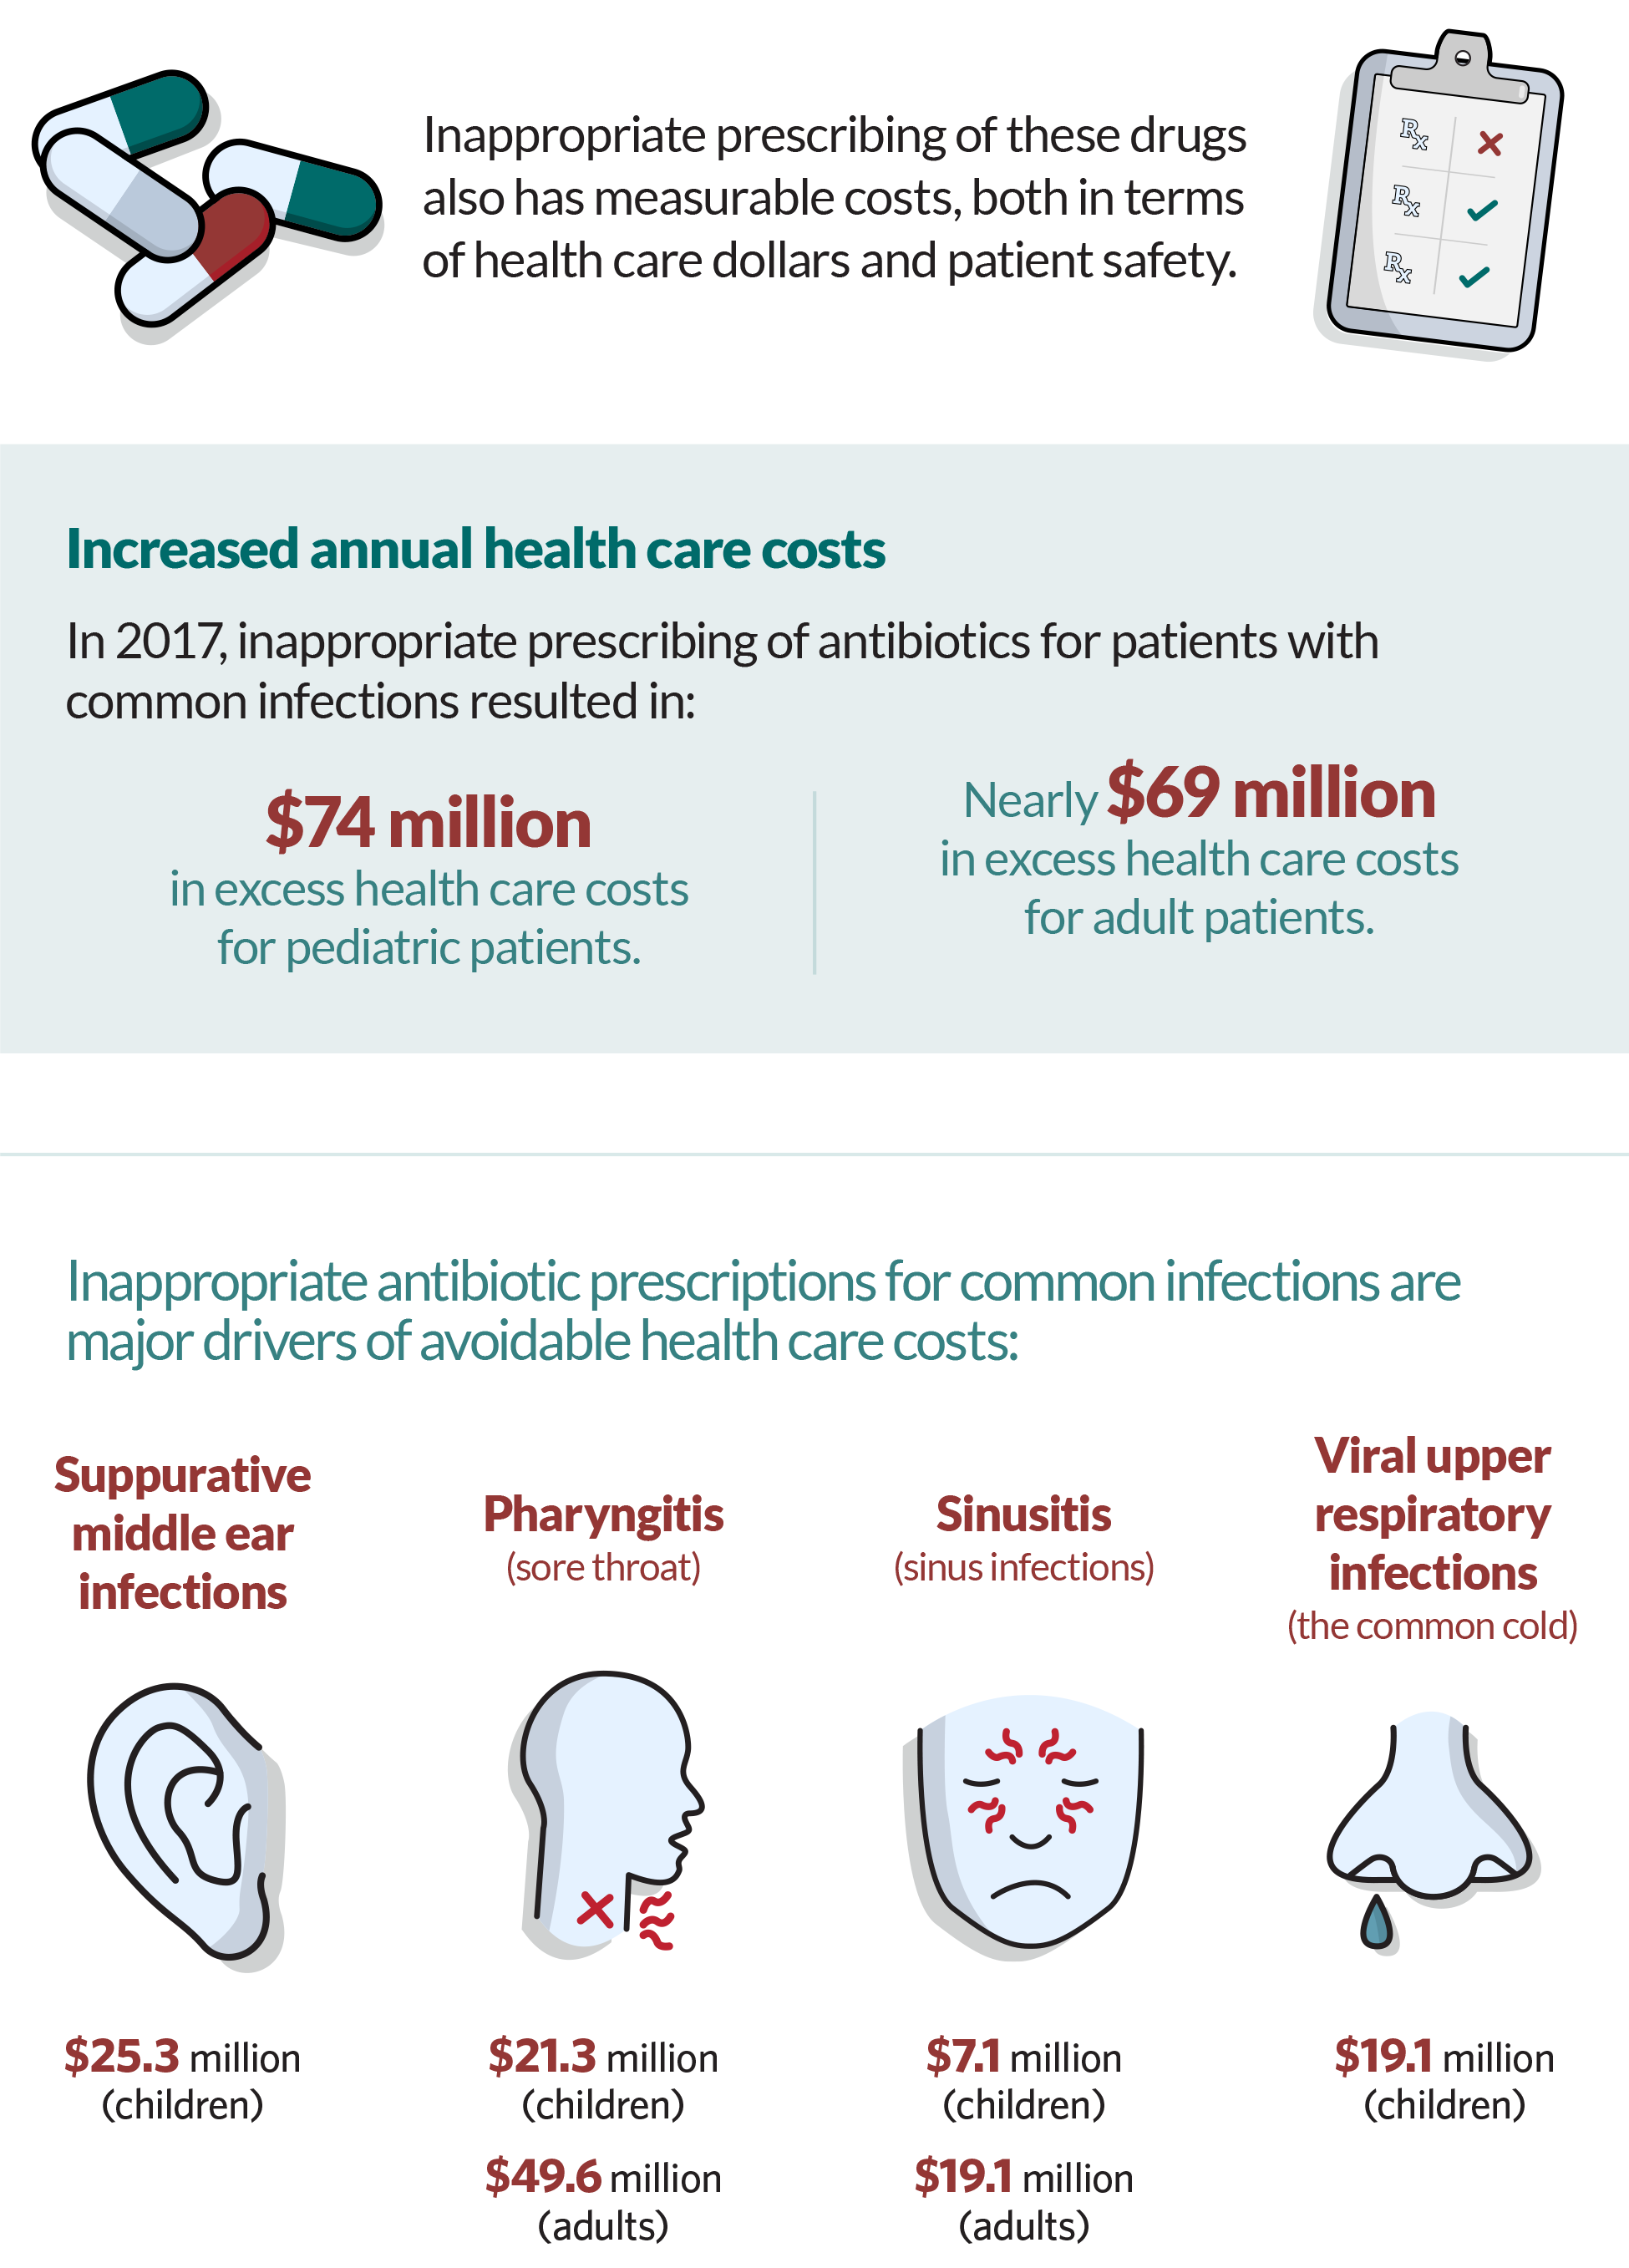 Inappropriate prescribing of these drugs also has measurable costs, both in terms of health care dollars and patient safety. Increased health care costs In 2017, inappropriate prescribing of antibiotics for patients with common infections resulted in $74 million in excess health care costs for pediatric patients. Nearly $69 million in excess health care costs for adult patients. Inappropriate antibiotic prescriptions for common infections are major drivers of avoidable health care costs: Suppurative middle ear infections, $25.3 million (children), Pharyngitis (sore throat) $21.3 million (children), $49.6 million (adults). Sinusitis (sinus infections), $7.1 million (children), $19.1 million (adults). Viral upper respiratory infections (the common cold), $19.1 million (children).